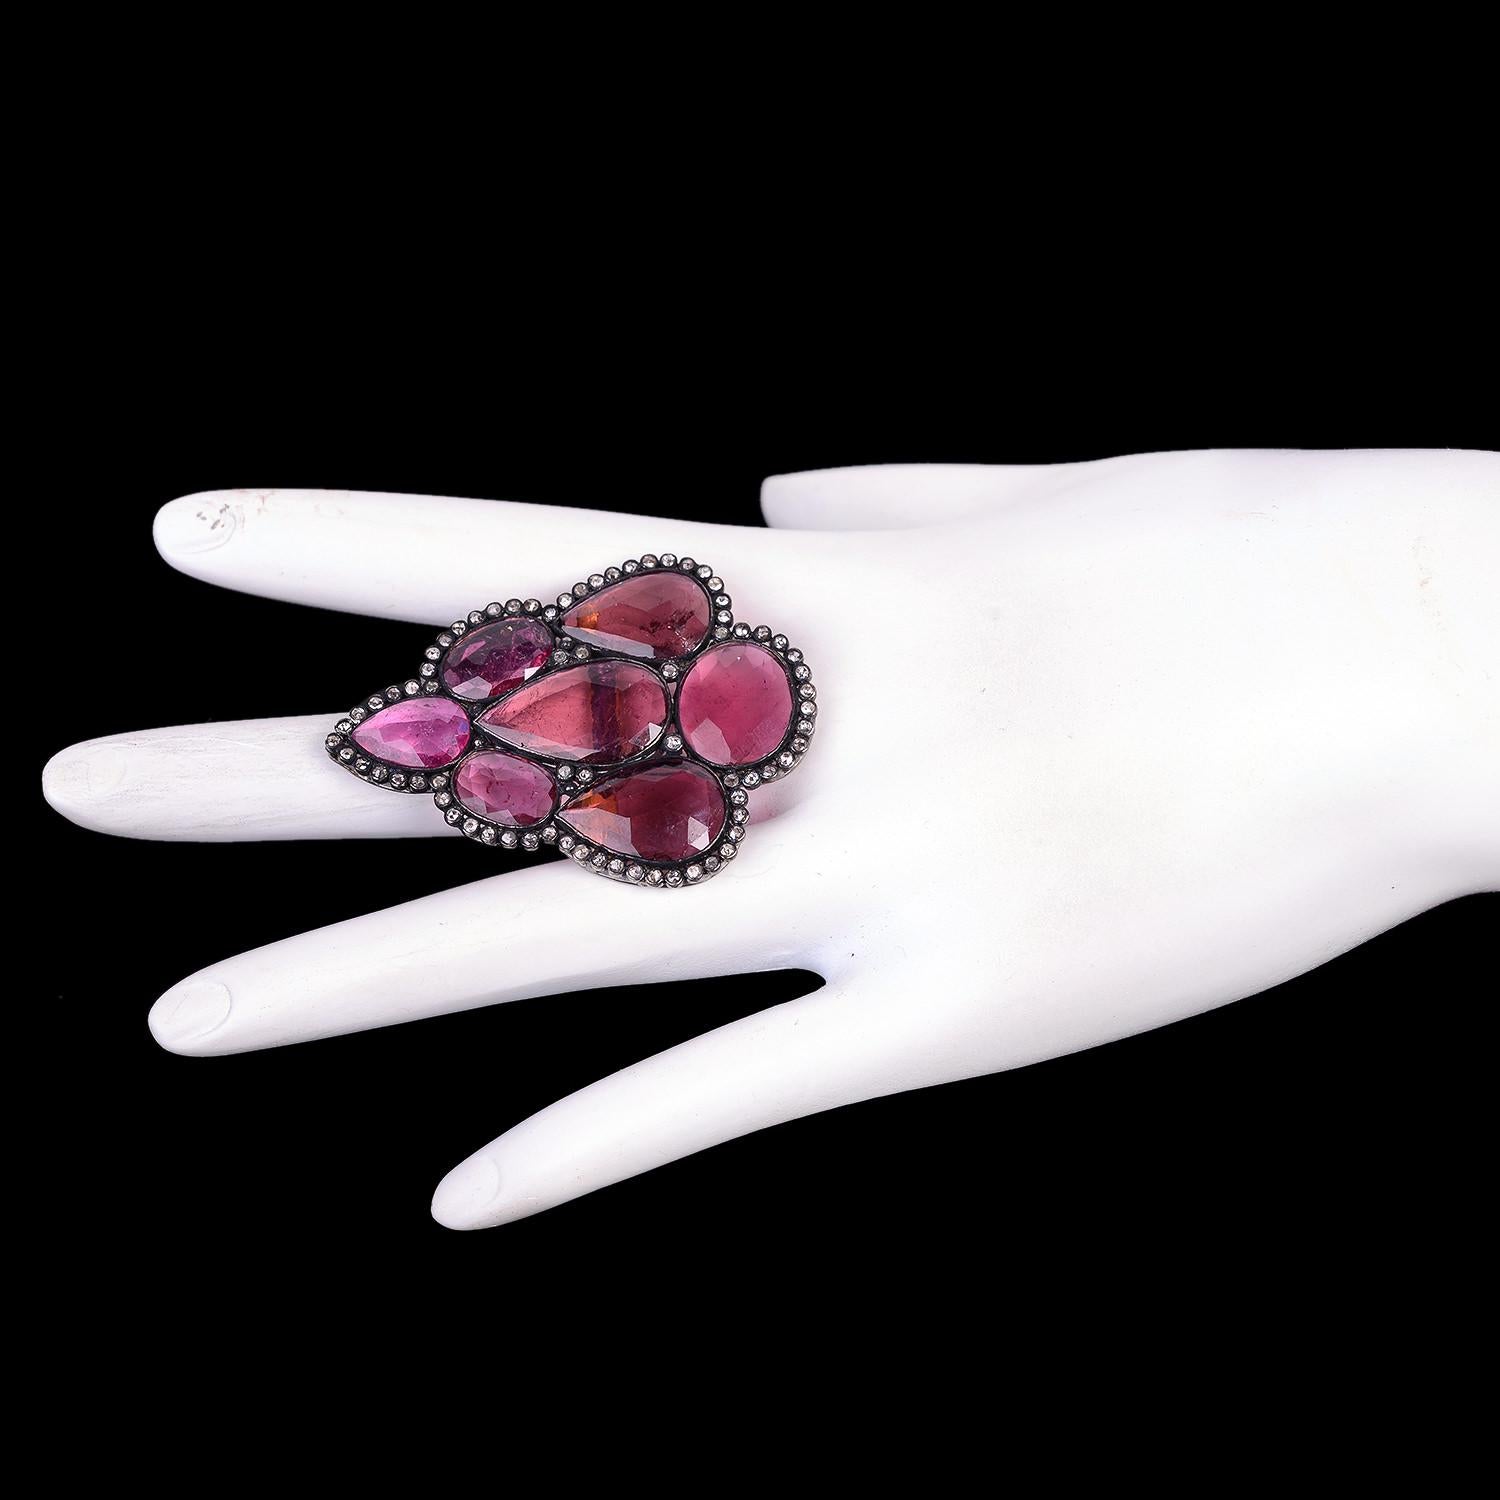 15.17ct Multishaped Pink Tourmaline Ring WIth Diamonds Made In 14k Gold & Silver In New Condition For Sale In New York, NY